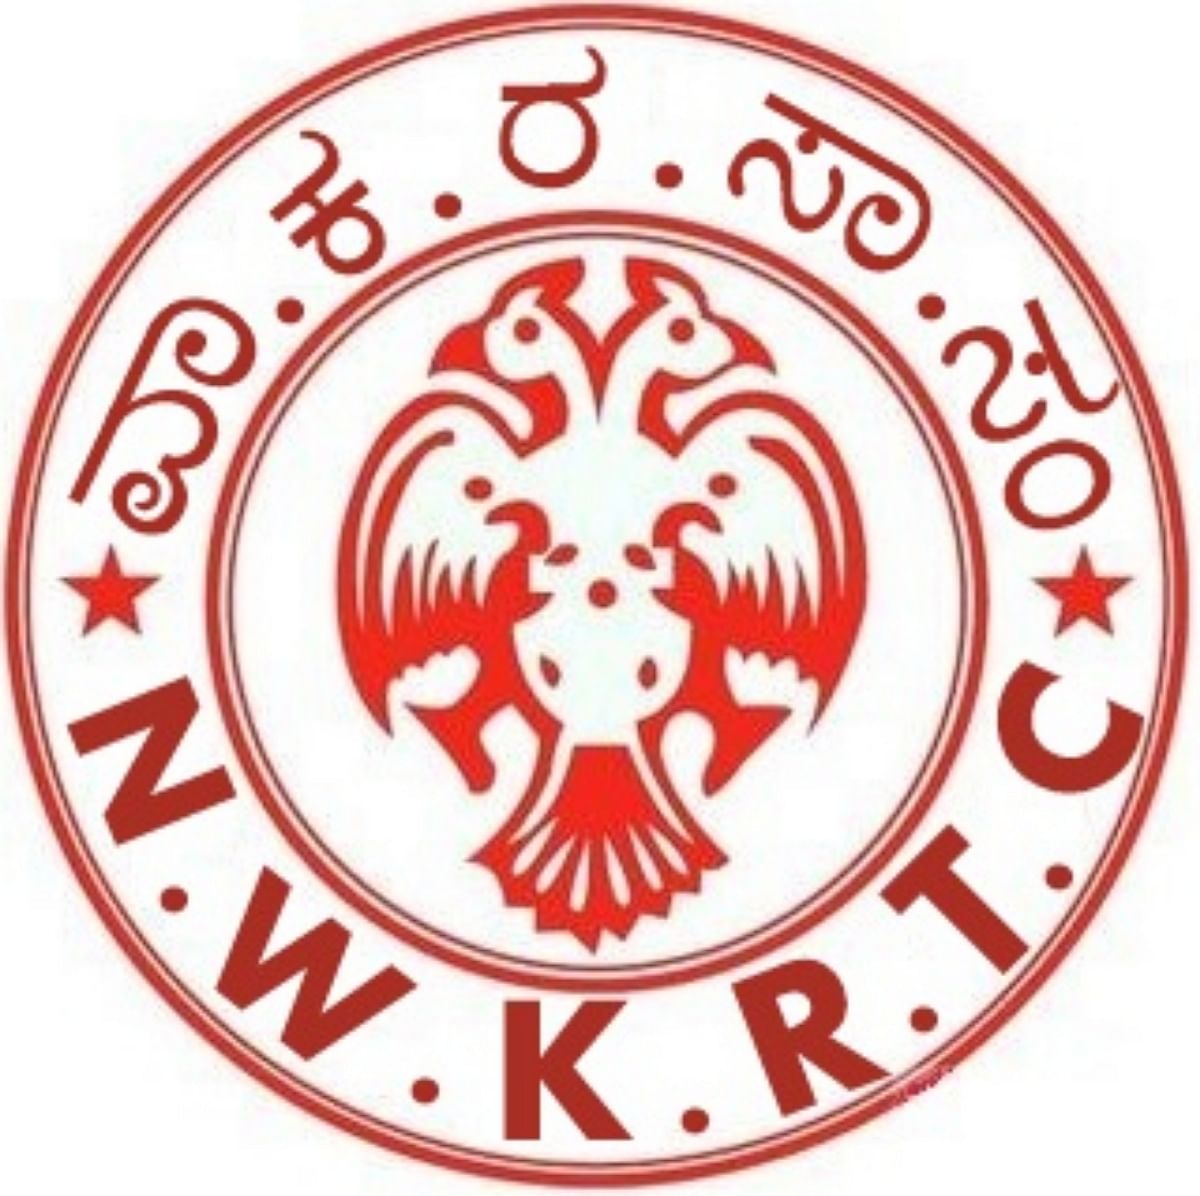 NWKRTC Recruitment Process to End Today for Driver & Driver-cum-Conductor Posts